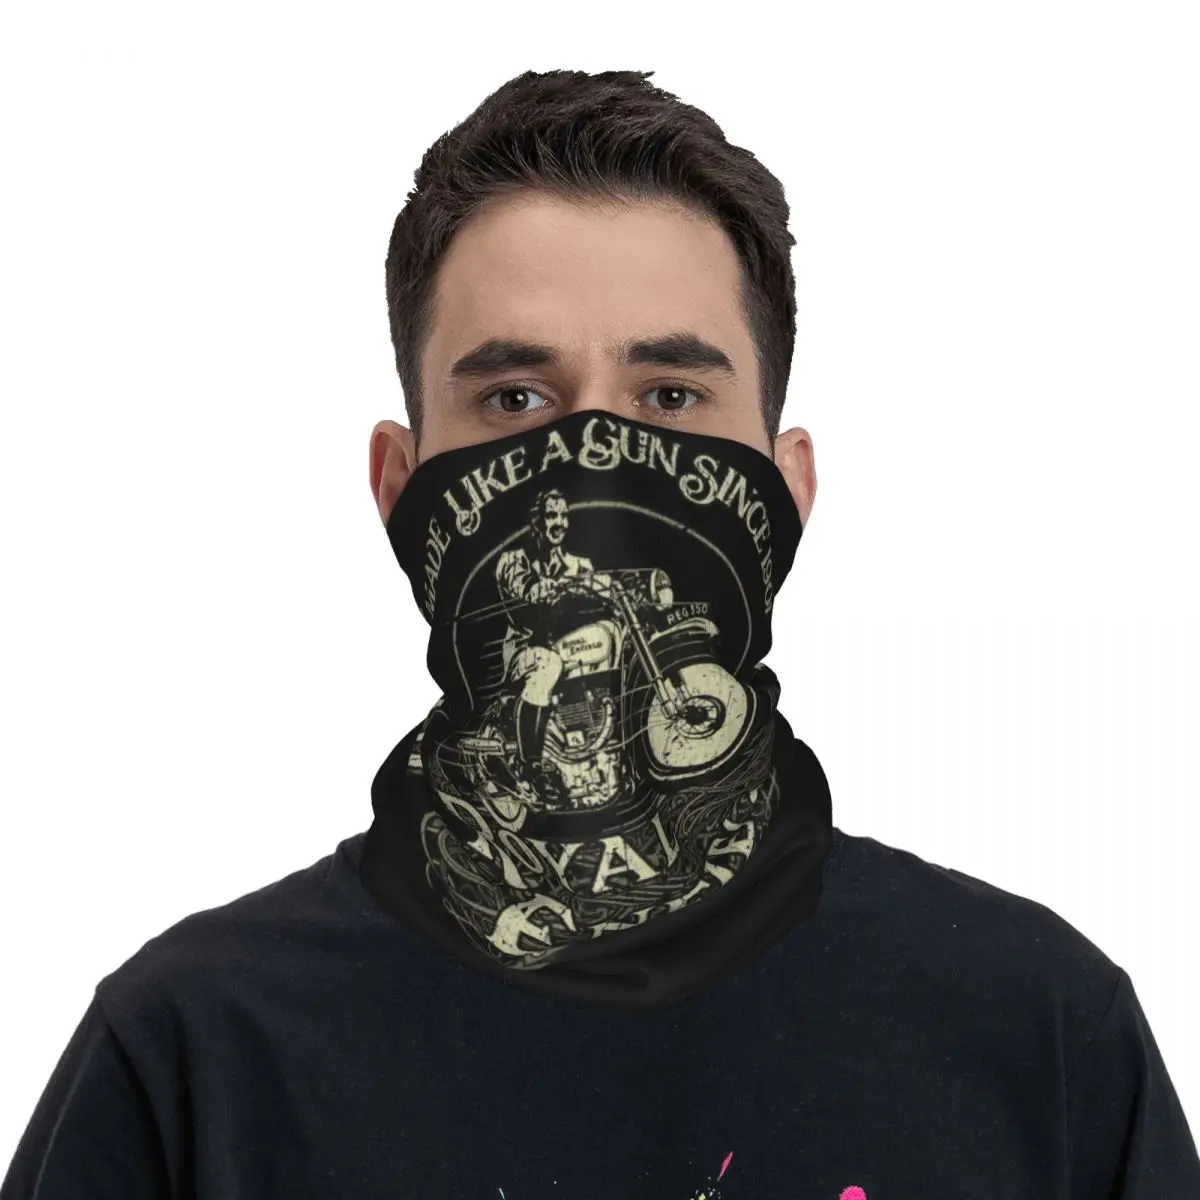 

Enfield Cycle Co Ltd 1901 Motorcycle Rider Bandana Neck Cover Printed Motorbike Wrap Scarf Multifunctional Face Mask Outdoor